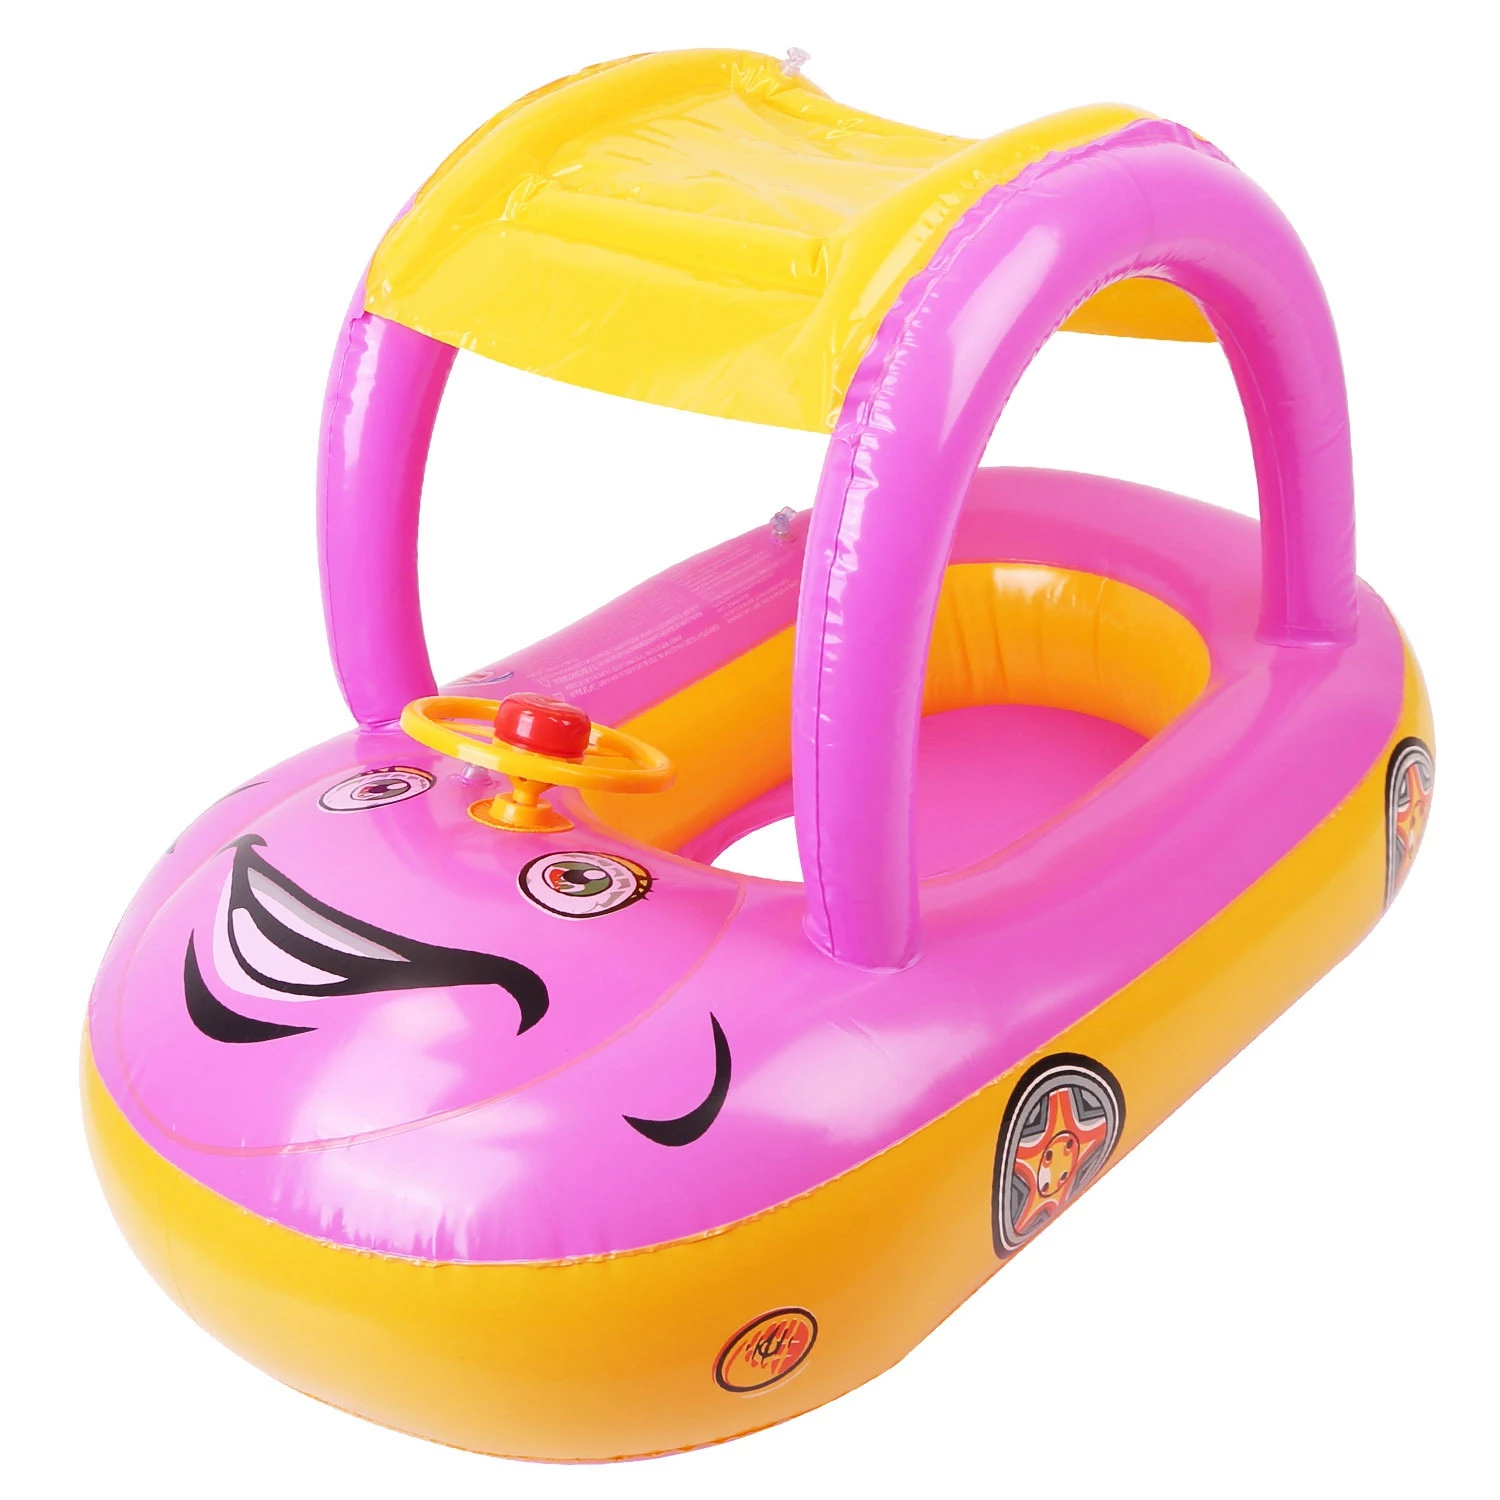 Baby Inflatable Pool Float Car Shaped Toddler Swimming Float Boat Pool Toy Infant Swim Ring Pool